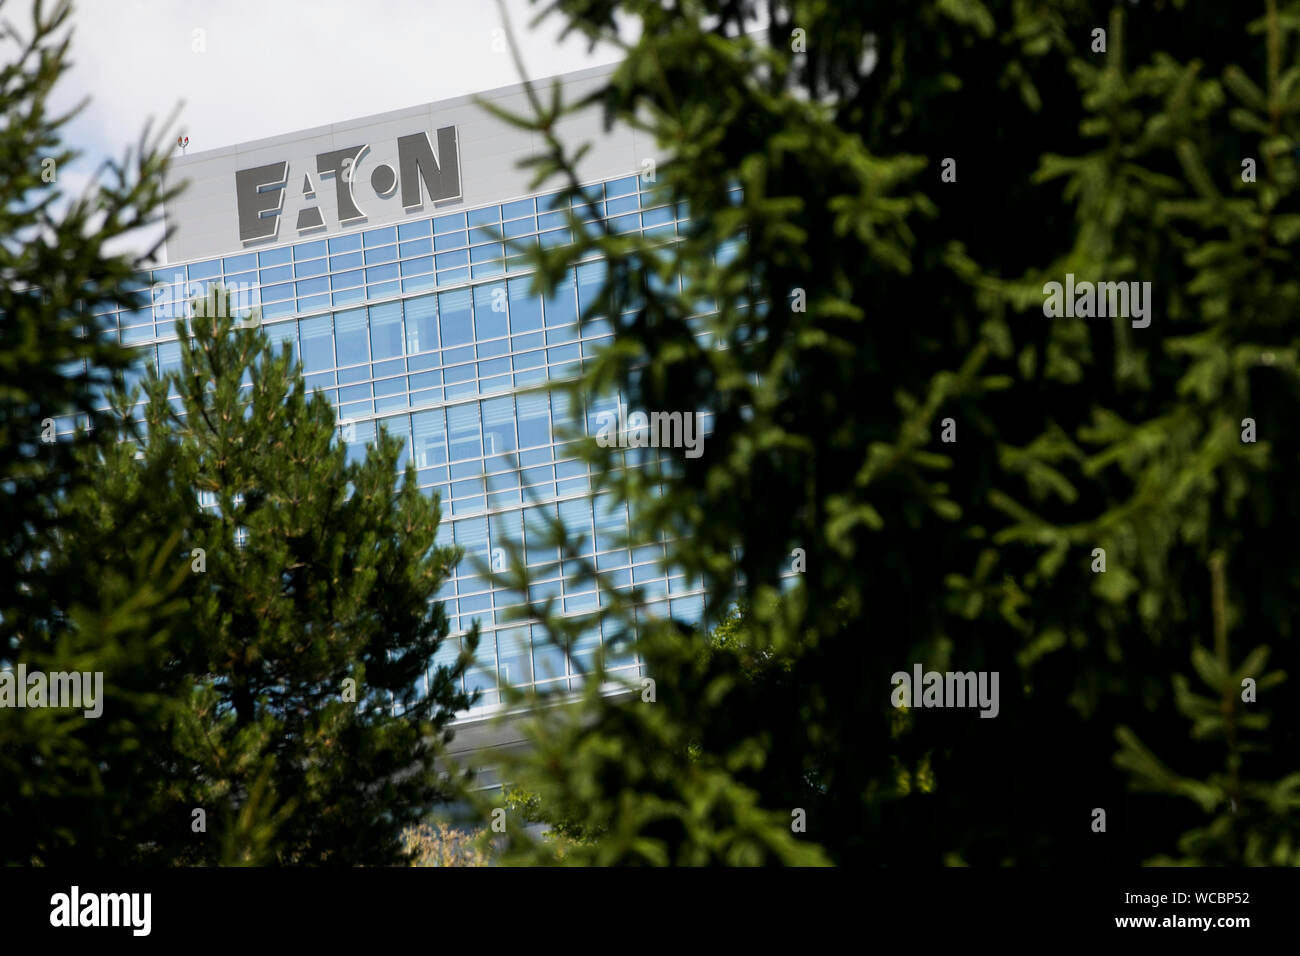 A logo sign outside of the operational headquarters of the Eaton Corporation in Beachwood, Ohio on August 11, 2019. Stock Photo